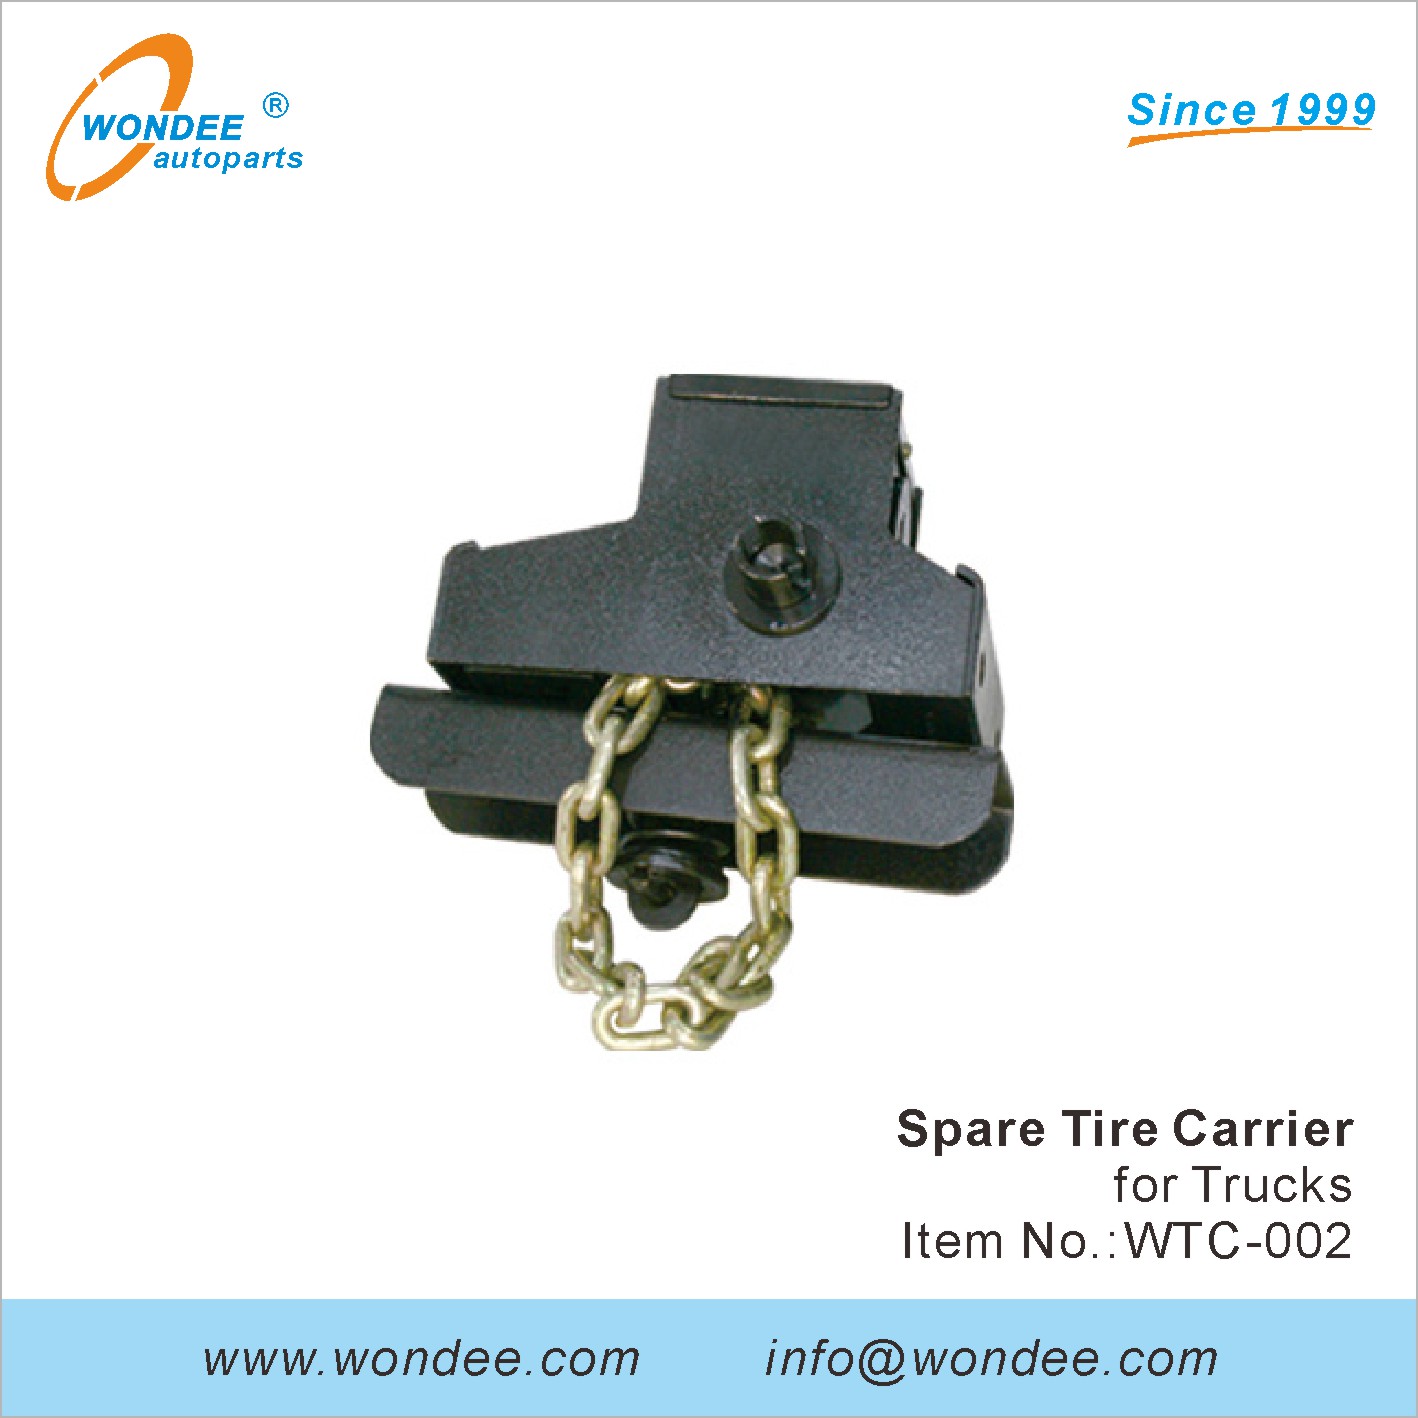 WONDEE spare tire carrier (2)